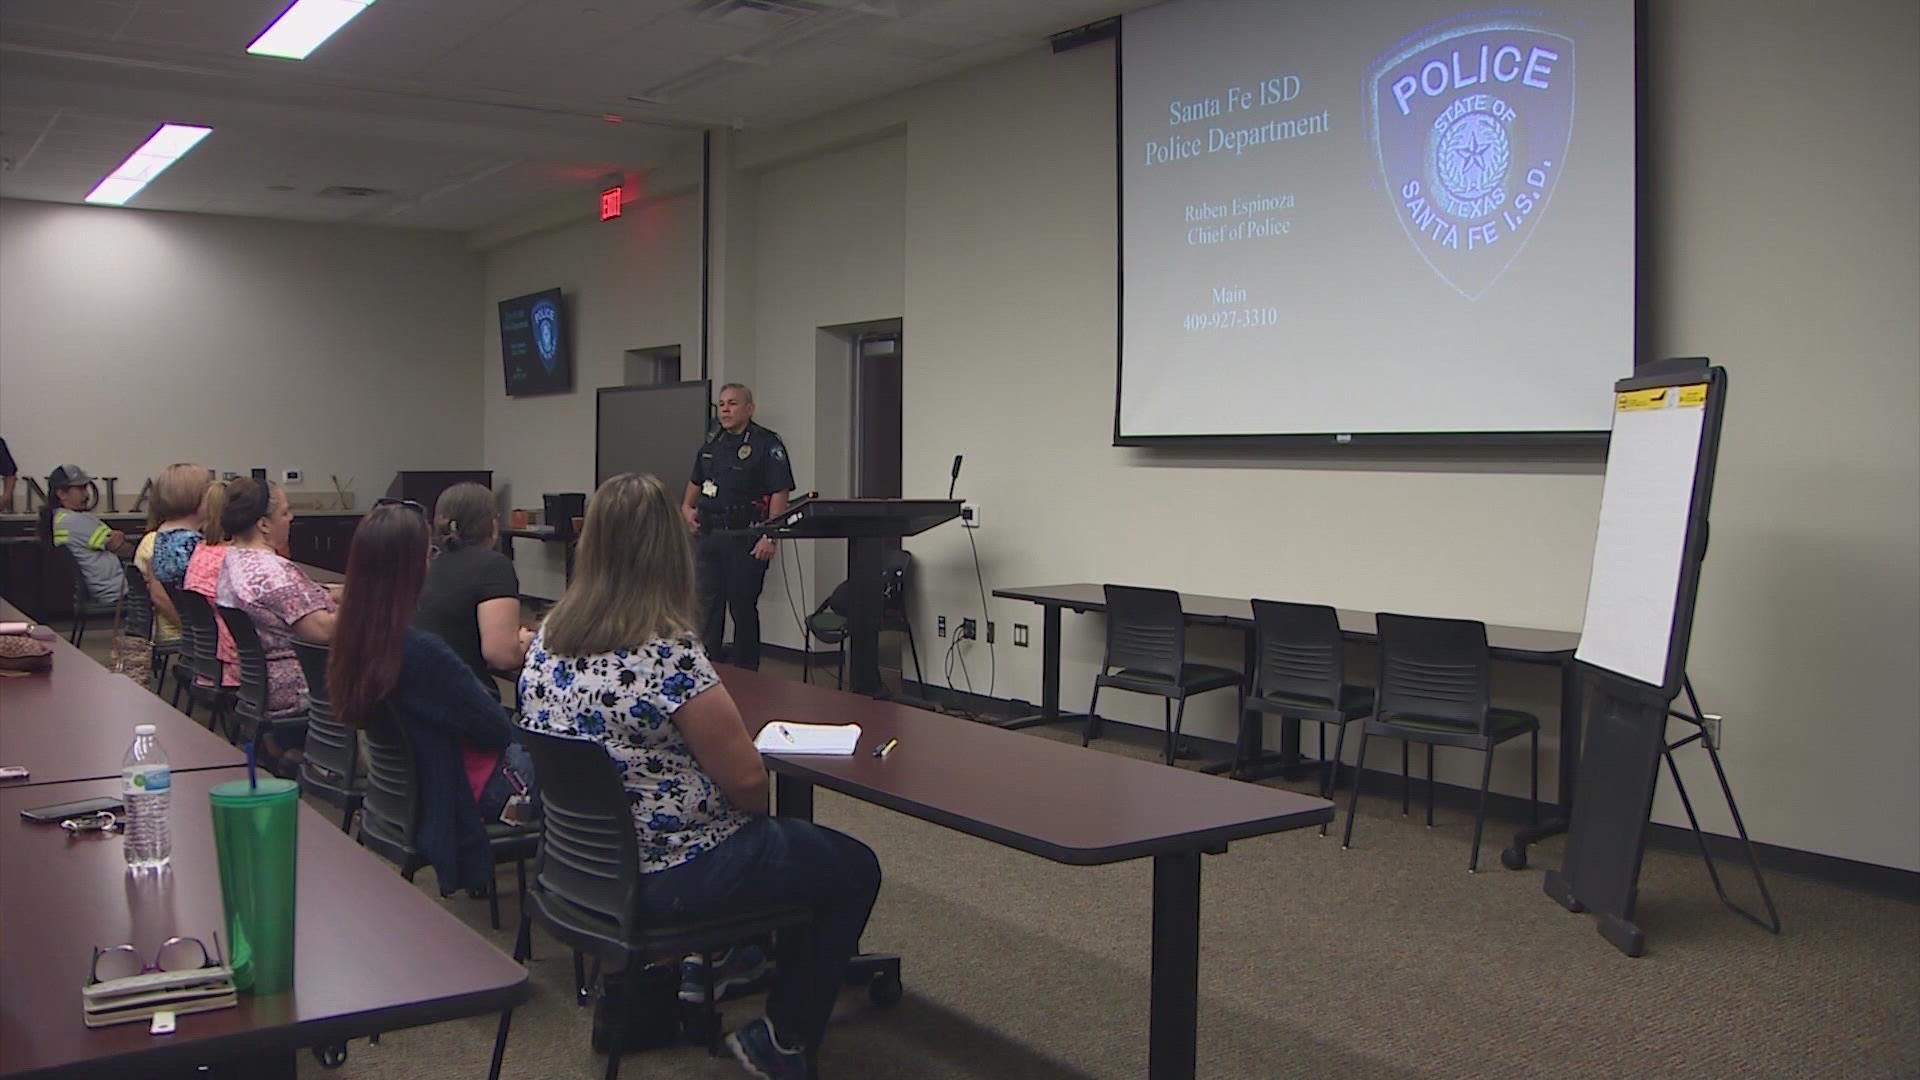 The course, known as Civilian Response to Active Shooter Events, teaches survival strategies. In Santa Fe ISD, new hires are required to take the class.